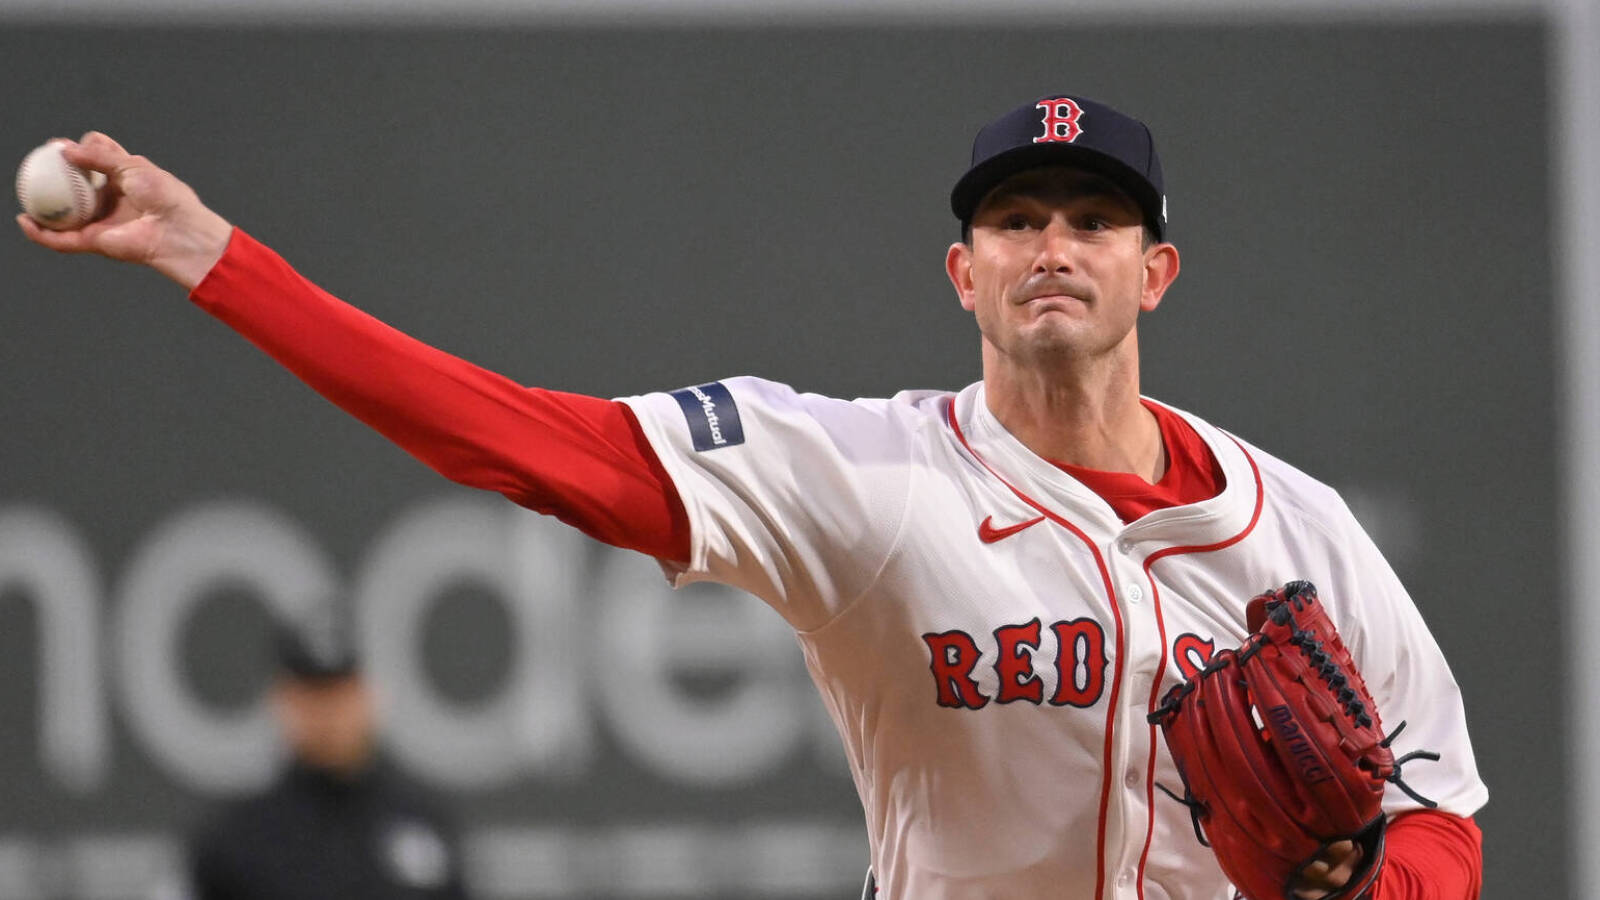 Red Sox pitcher suffers setback in recovery from injury